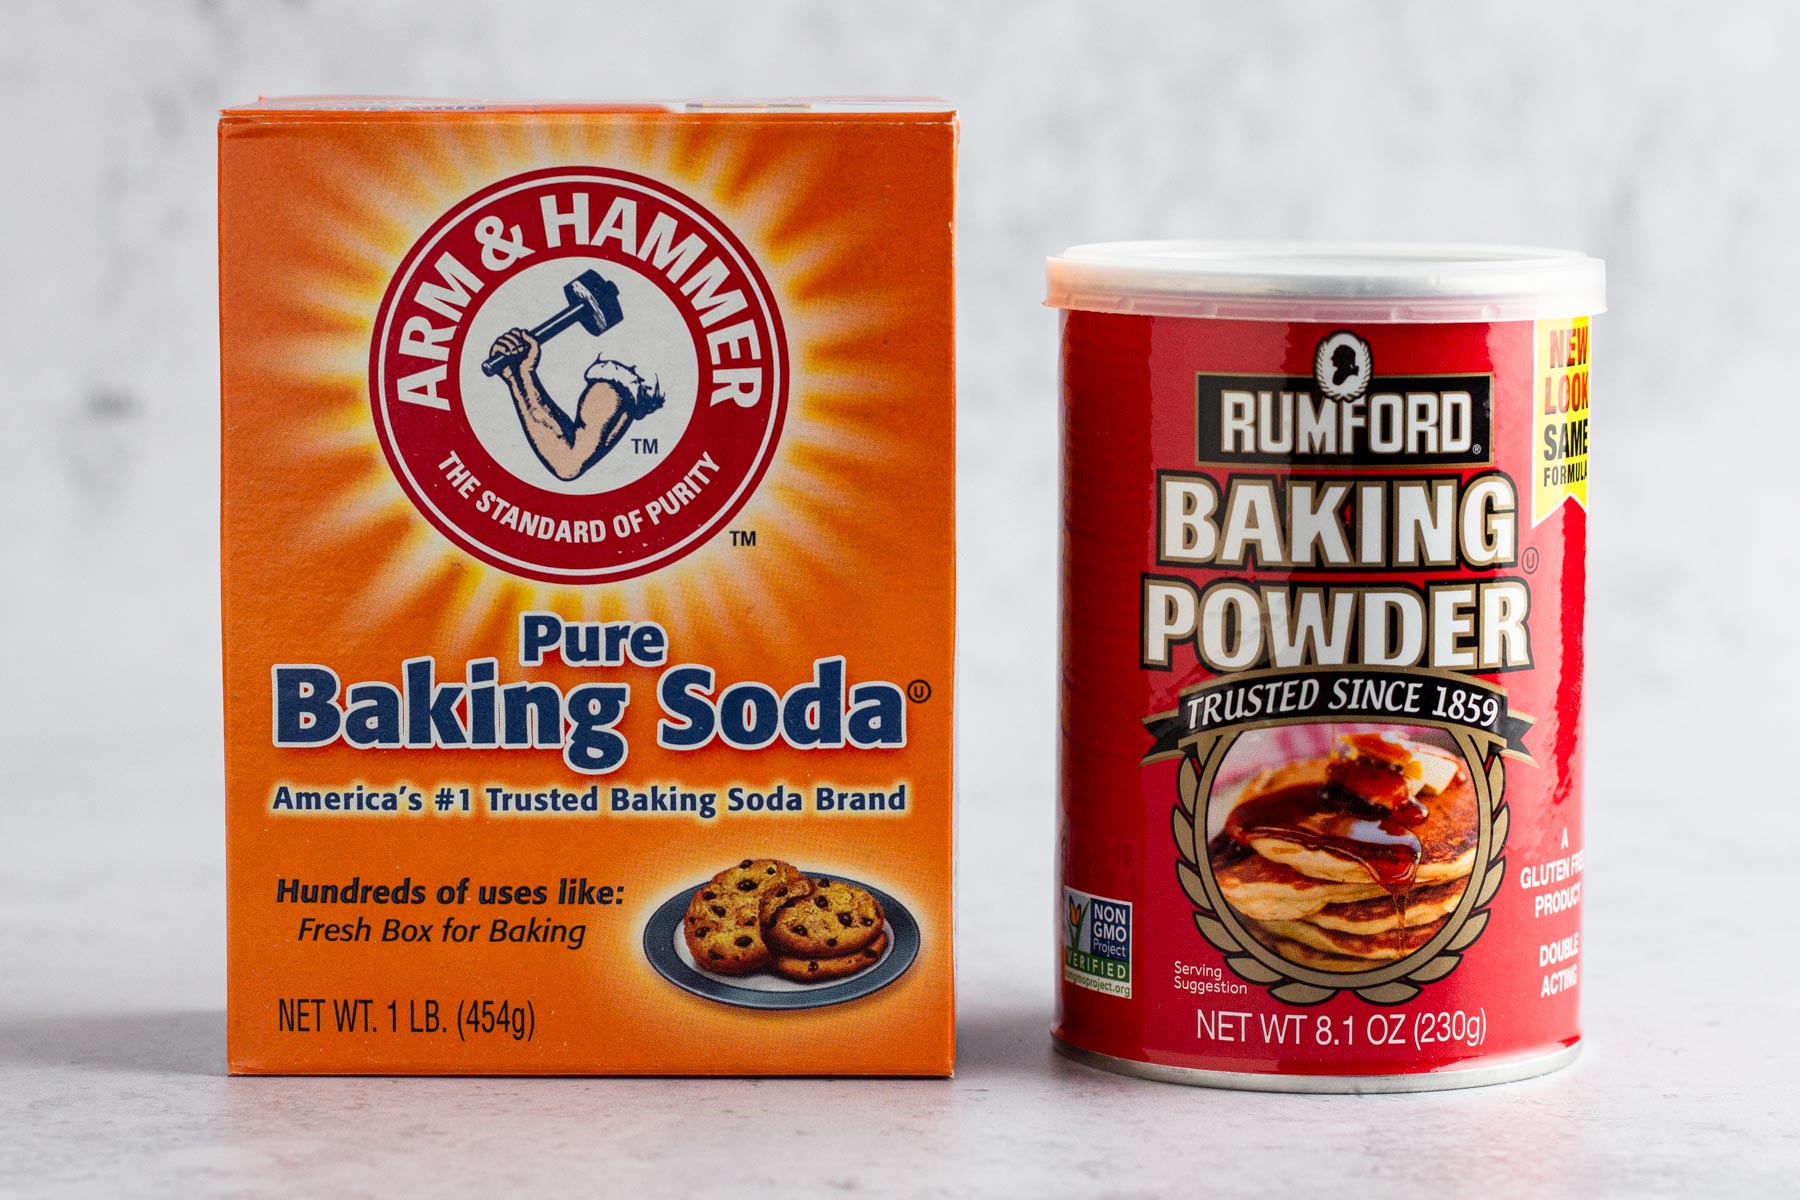 A box of baking soda and a can of baking powder on a gray surface.